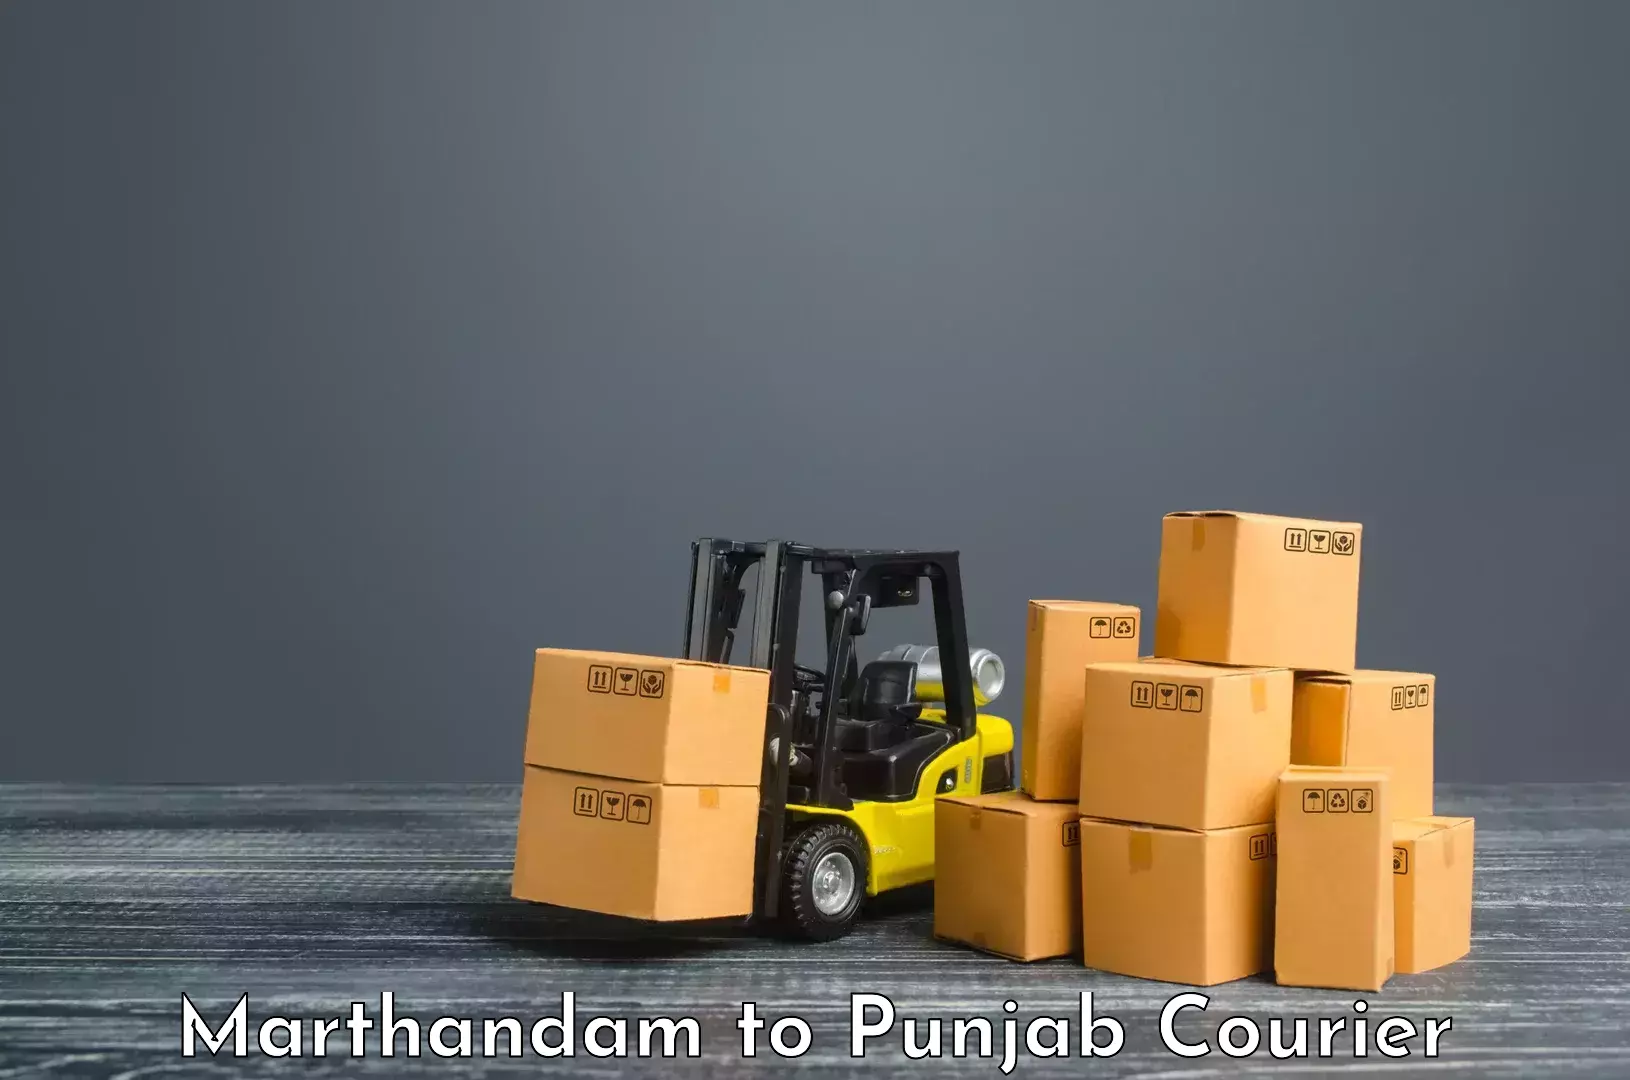 Comprehensive shipping network Marthandam to Pathankot